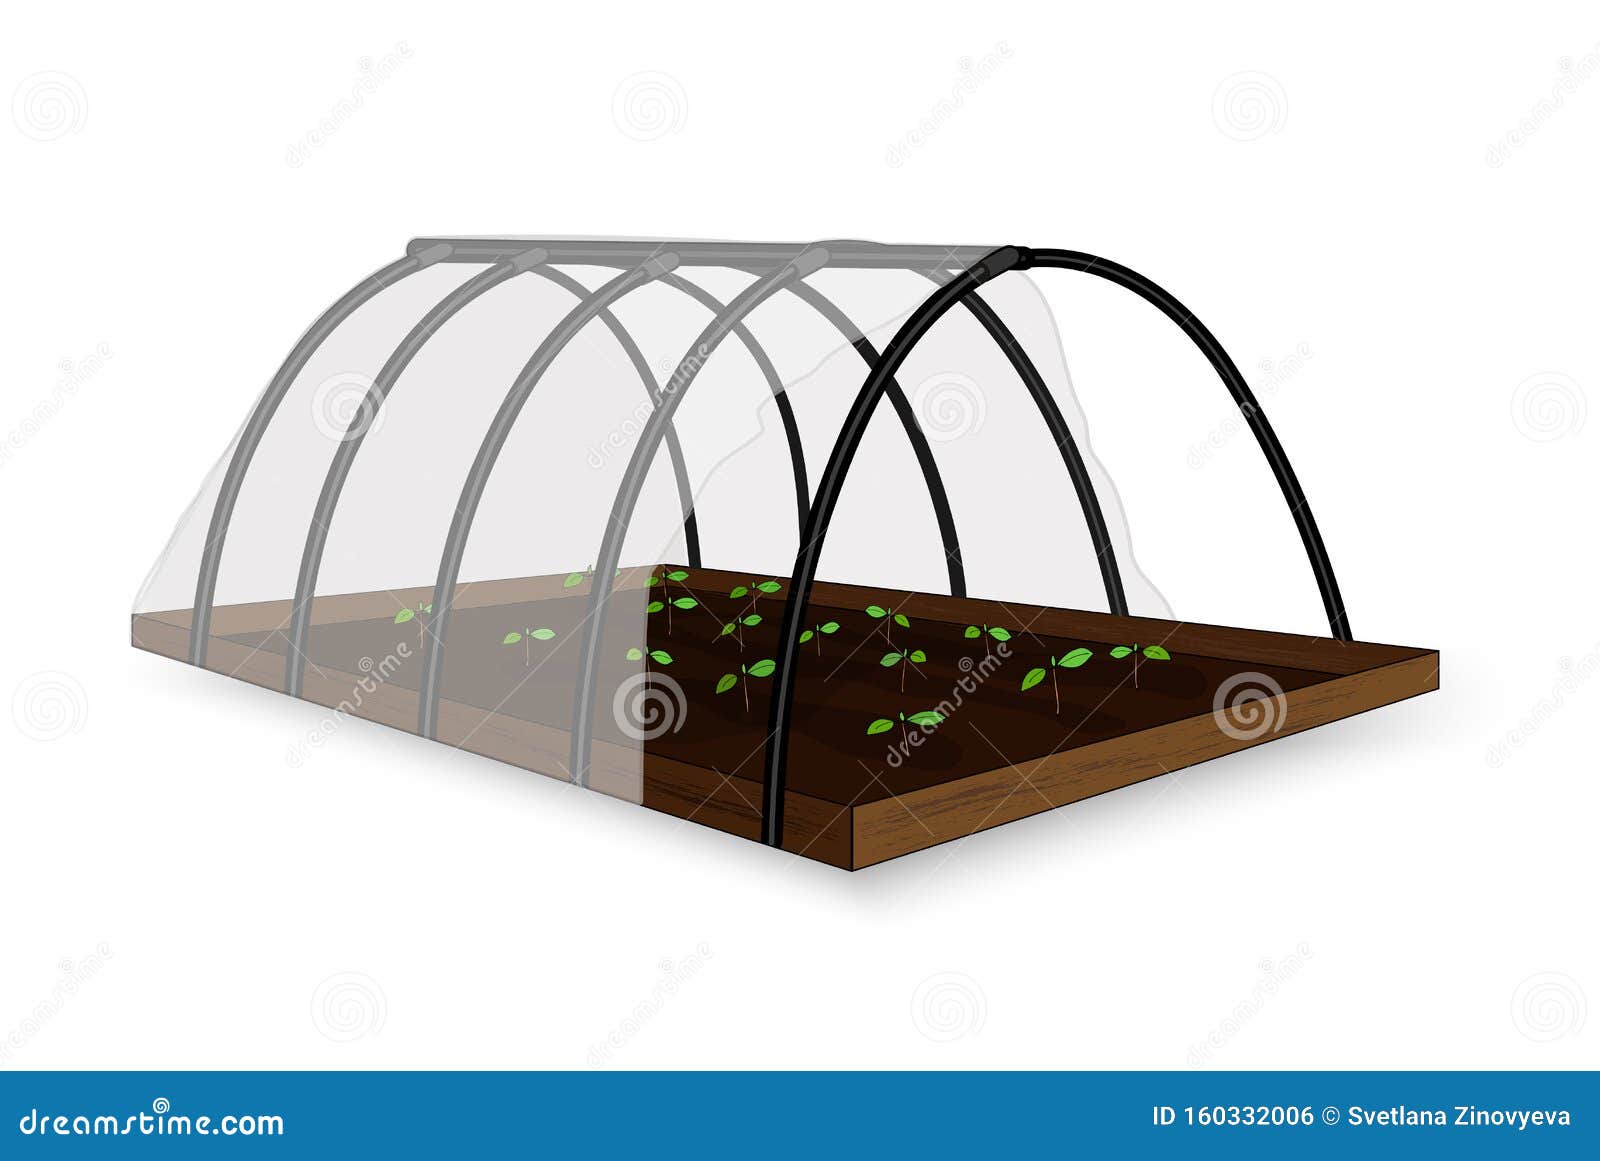 Illustration of a Small Greenhouse, Greenhouse Under the Film for ...